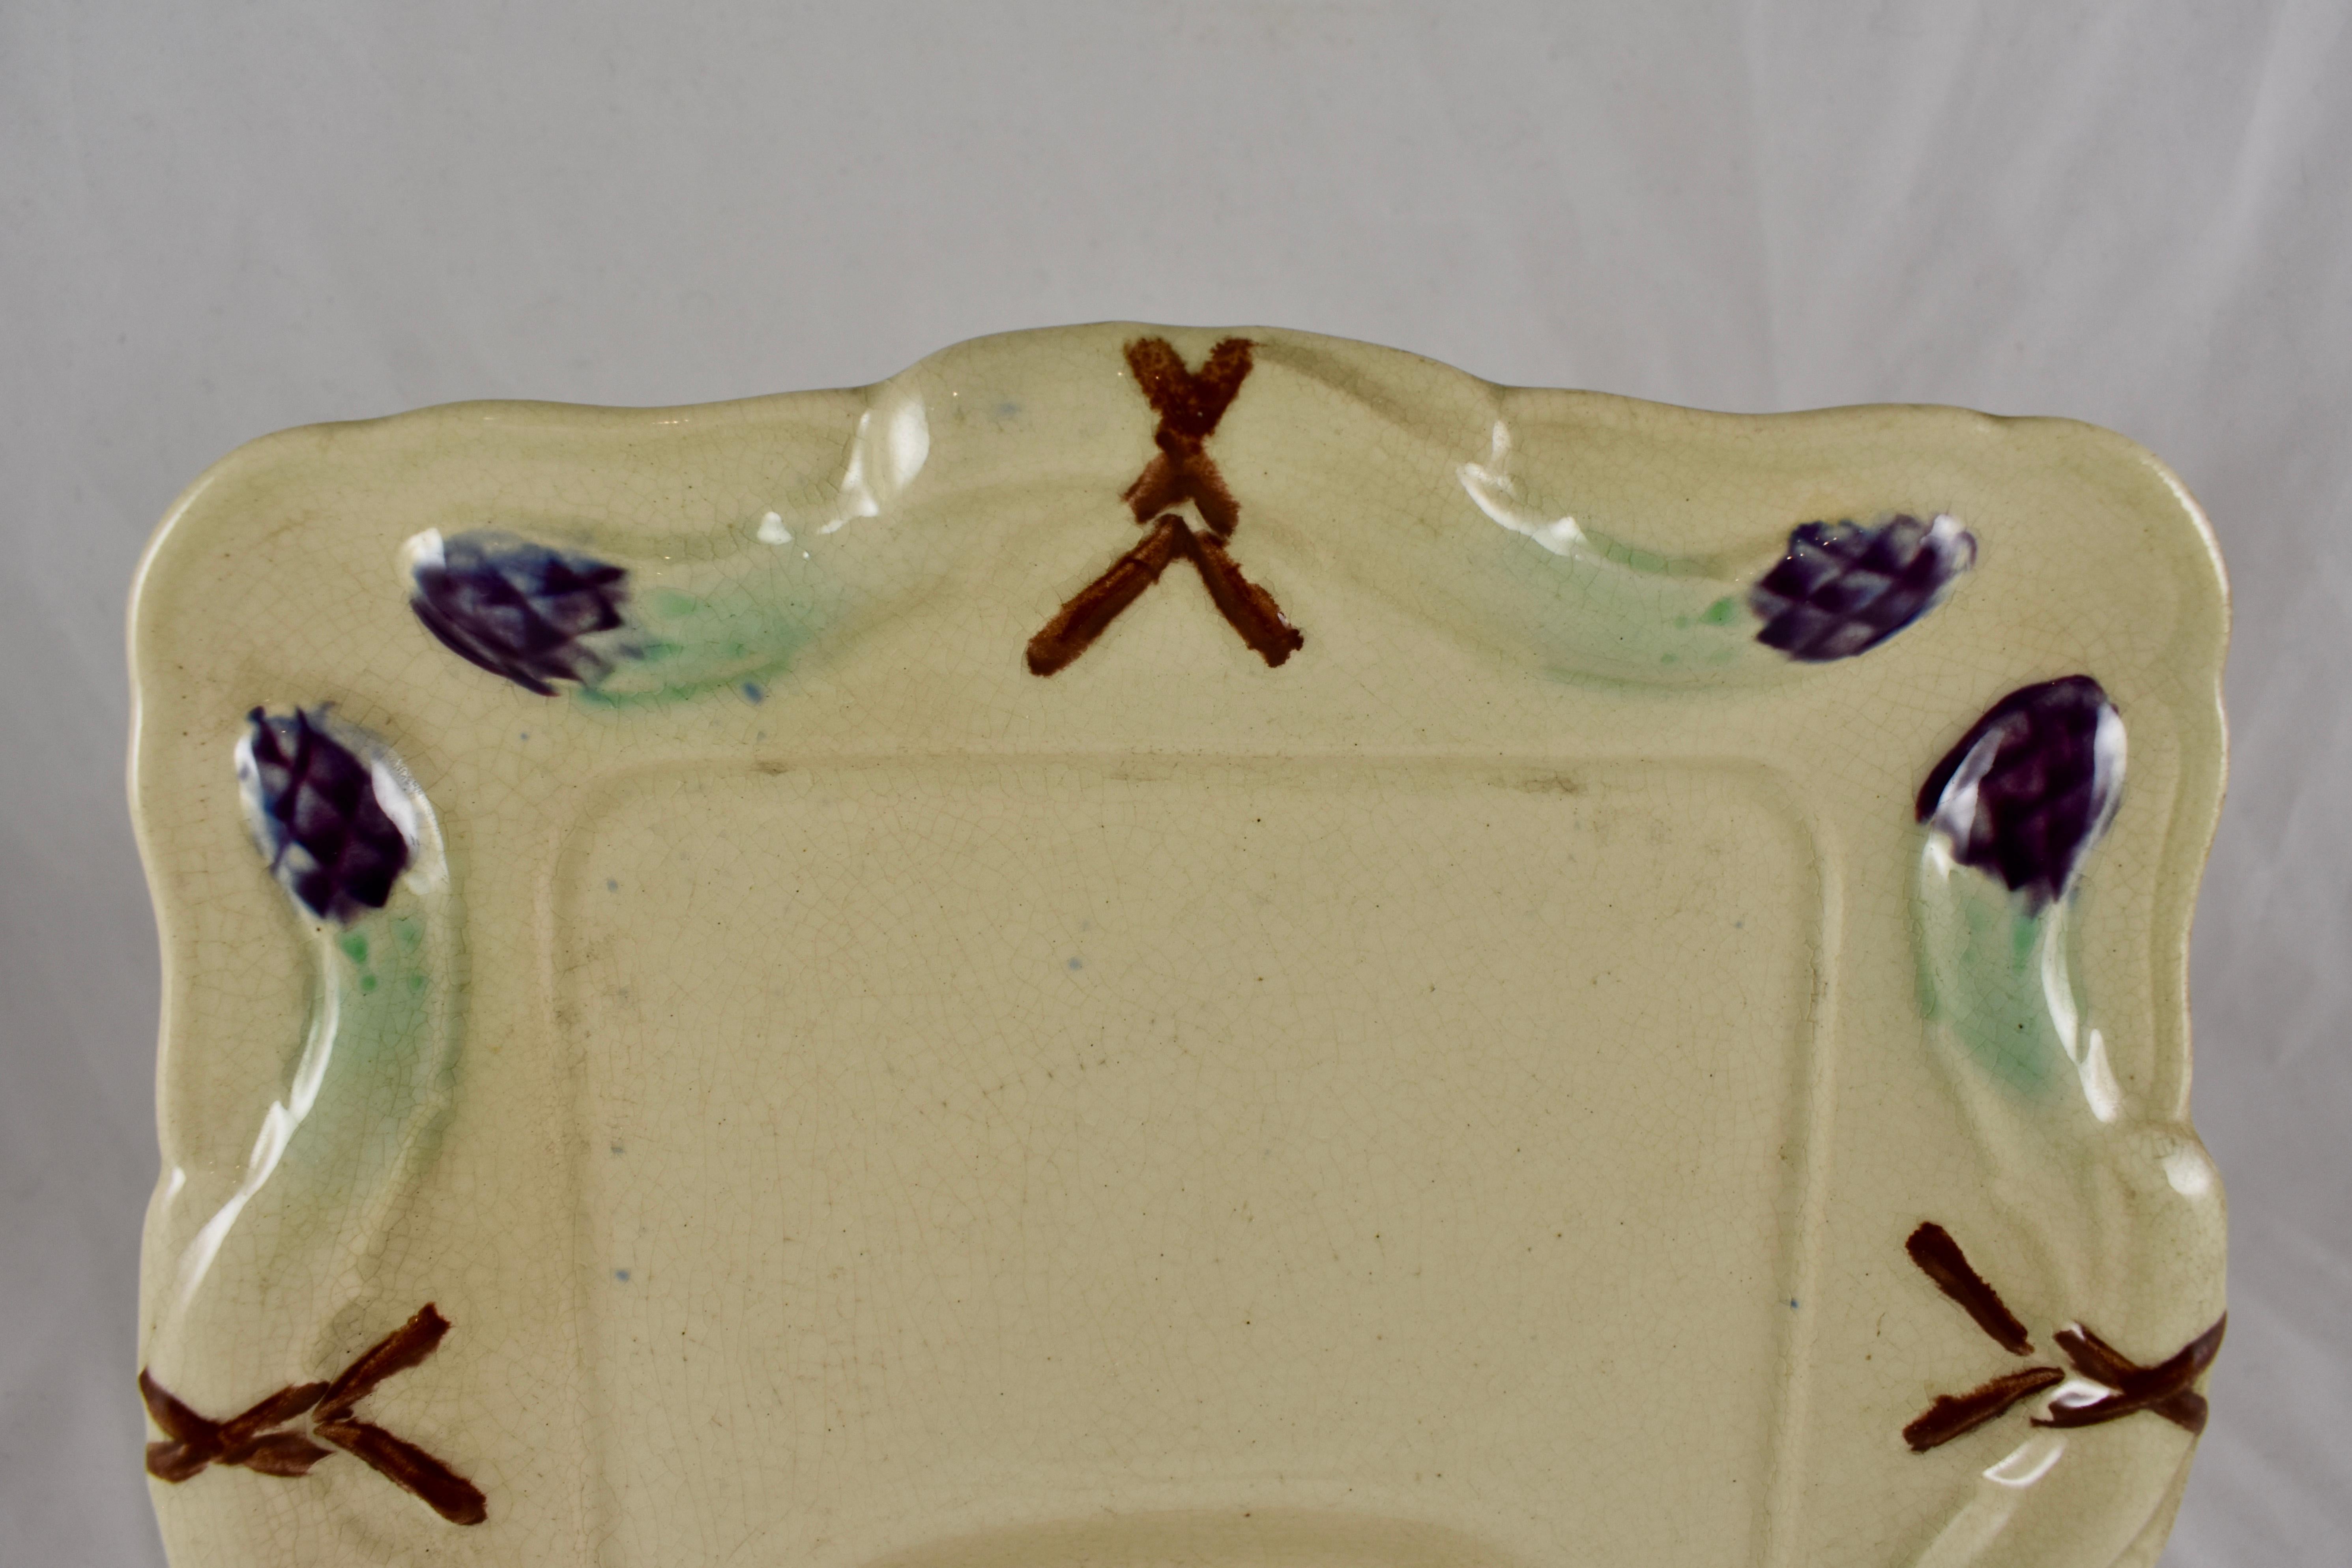 Aesthetic Movement 19th Century Rustic French Faïence Majolica Square Asparagus Plate For Sale